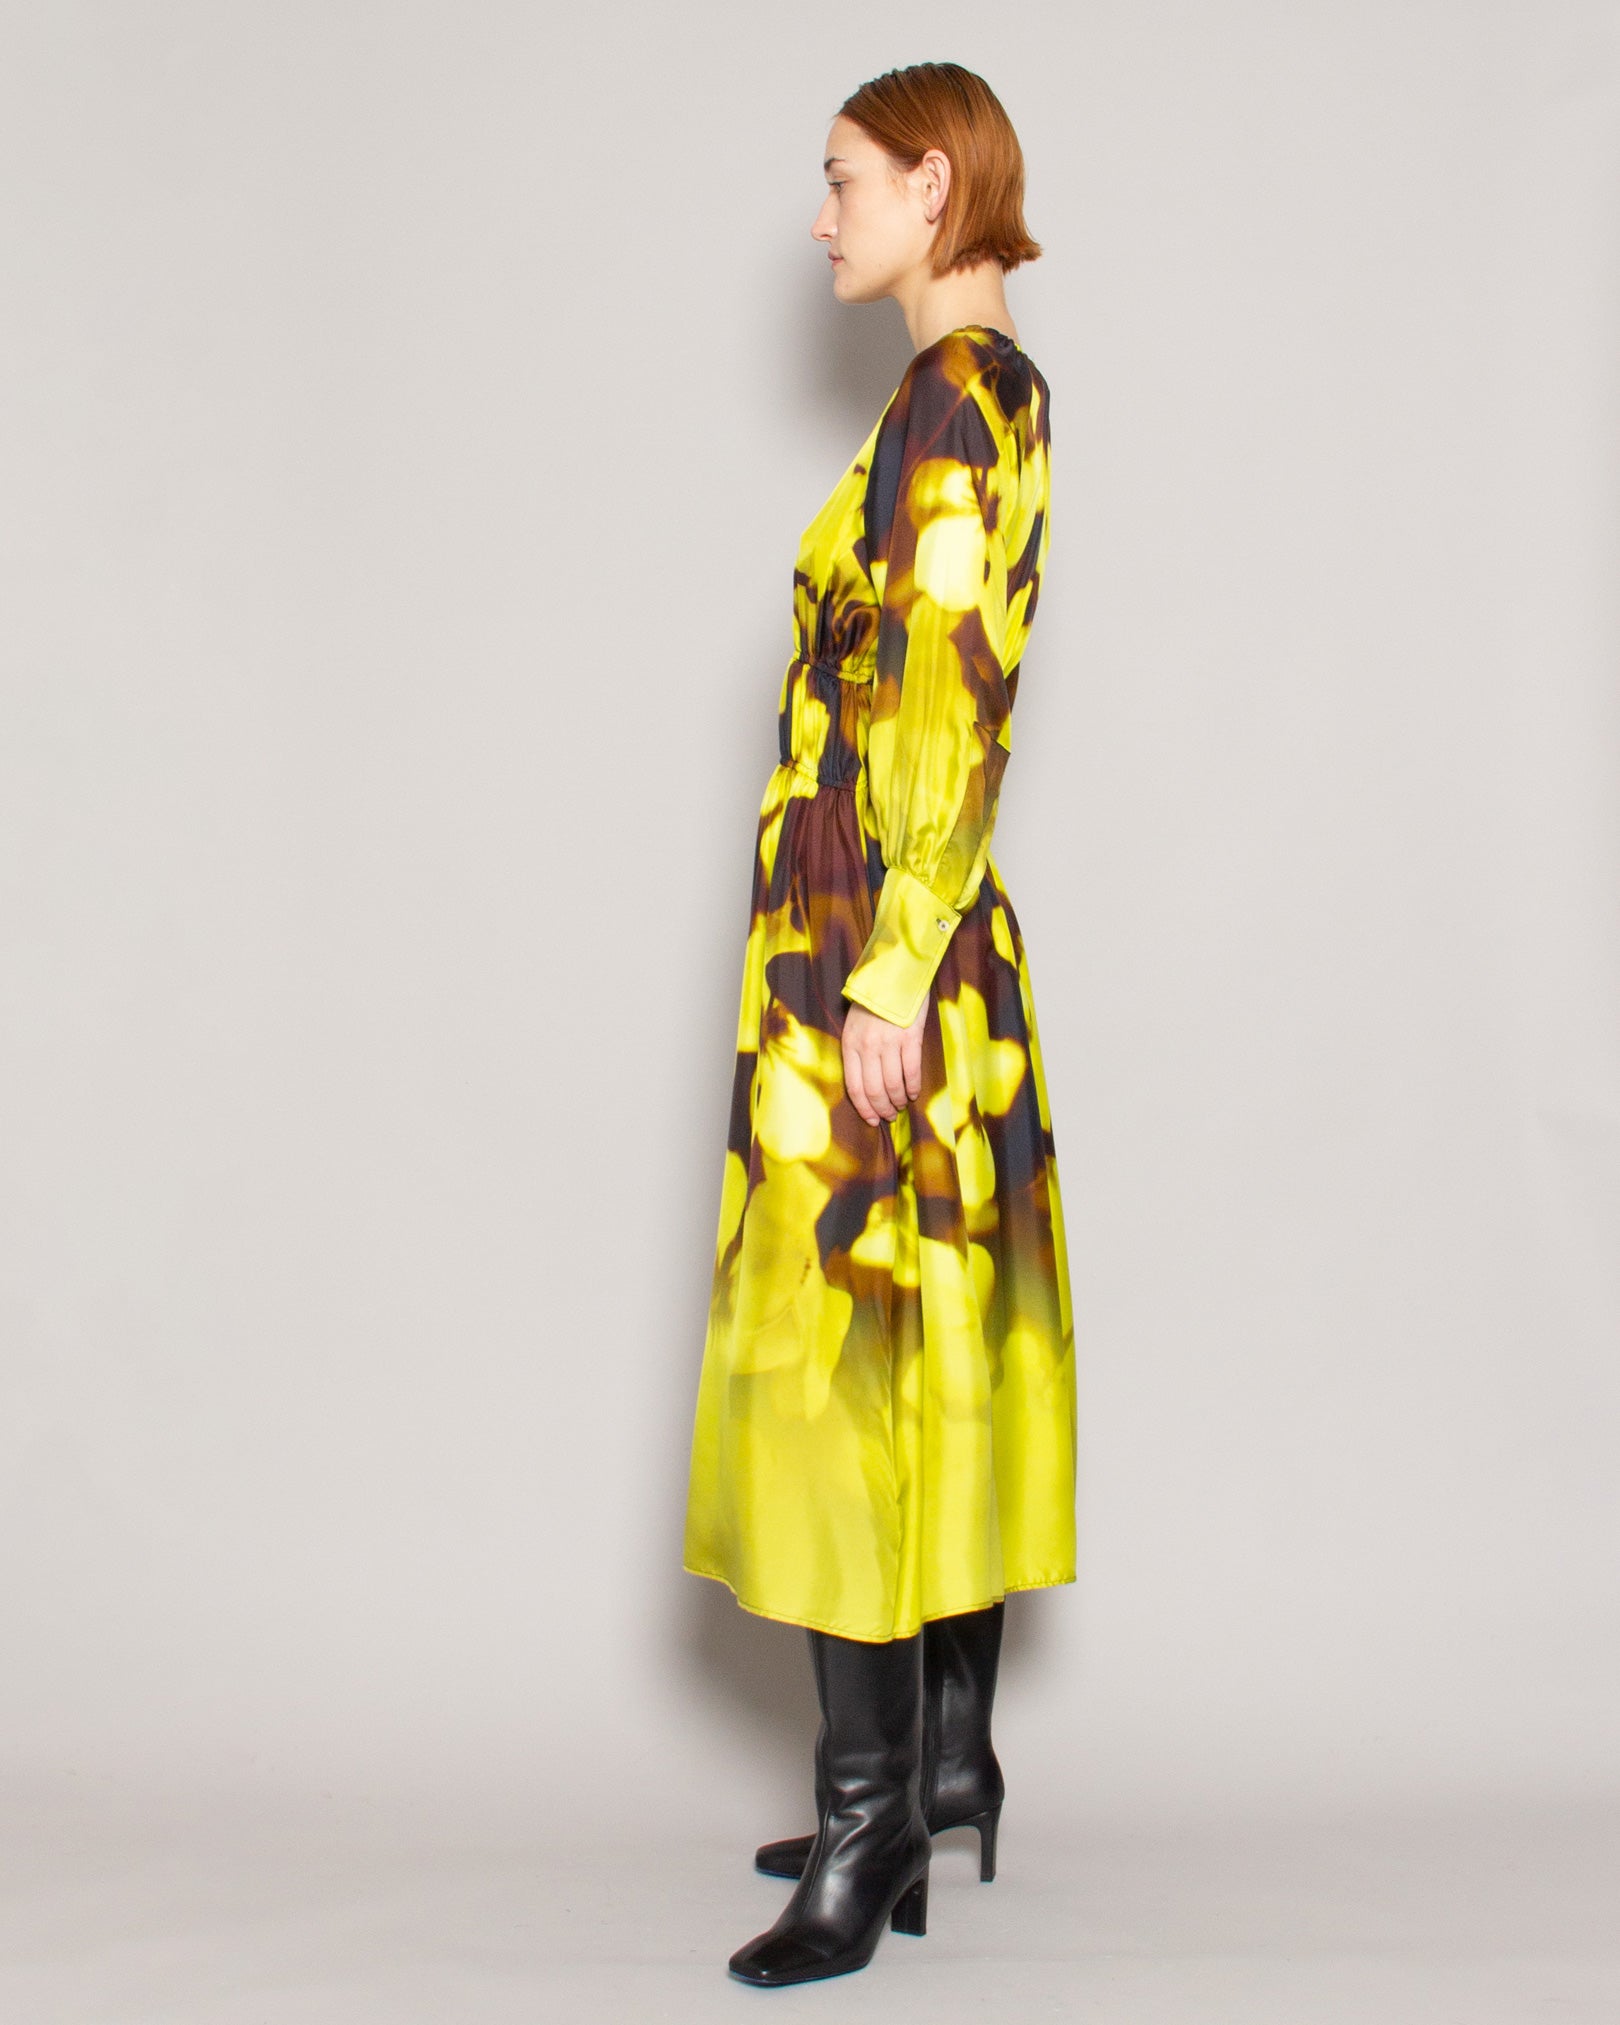 BEATRICE.B Gathered Silk Dress in Neon Blurred Floral available at Lahn.shop